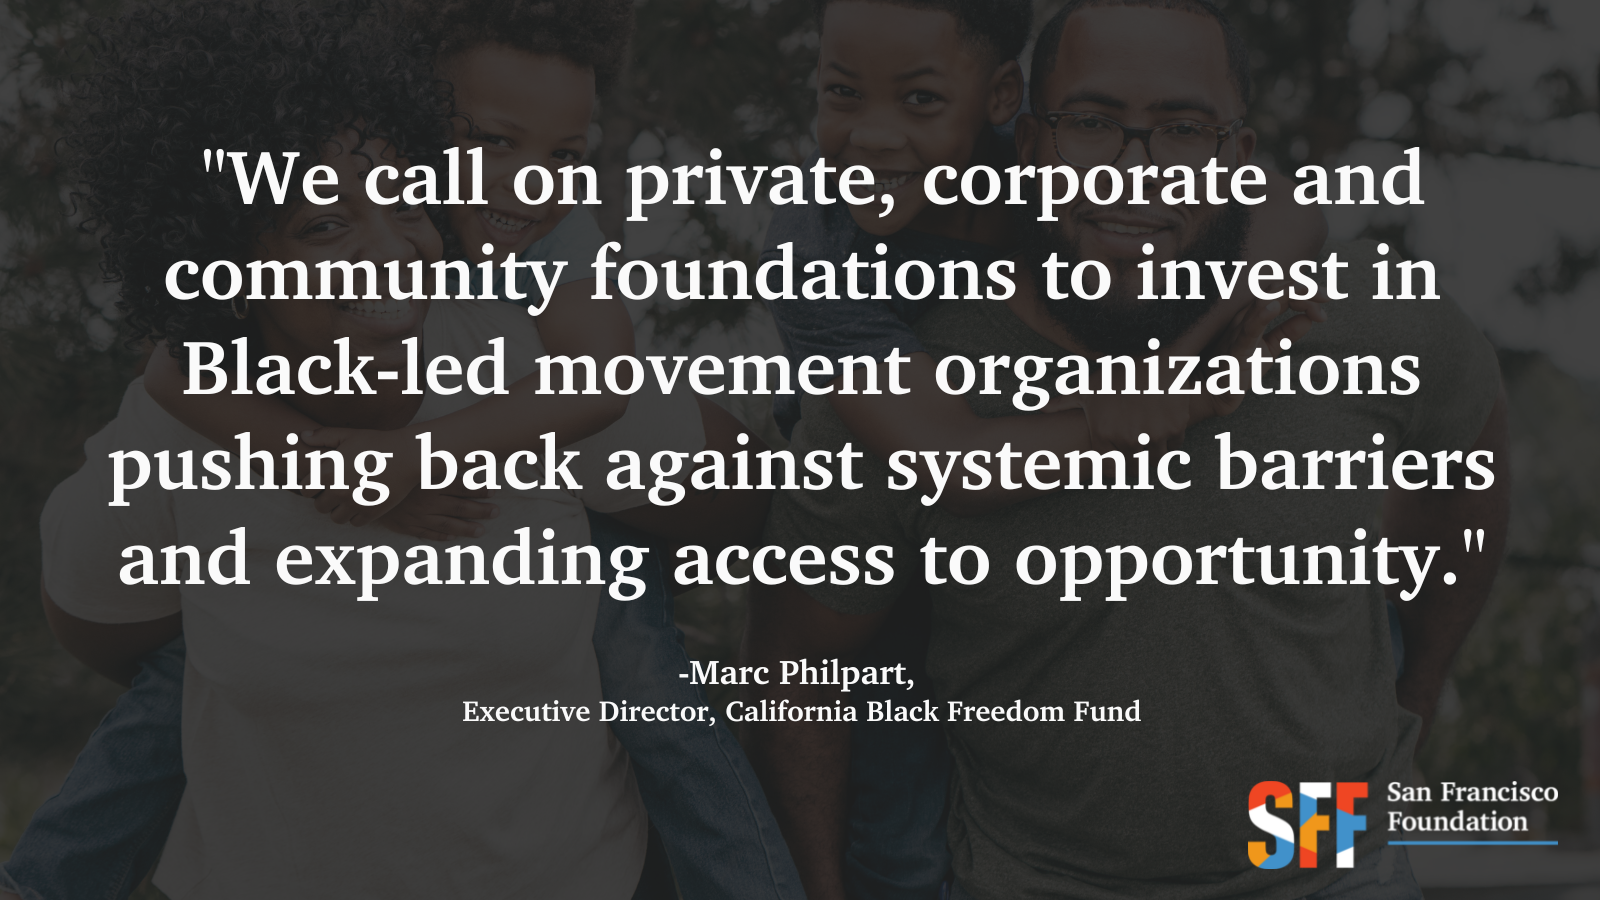 In Wake of Police Violence, SFF Joins Call to Action to Support Black-led Orgs.